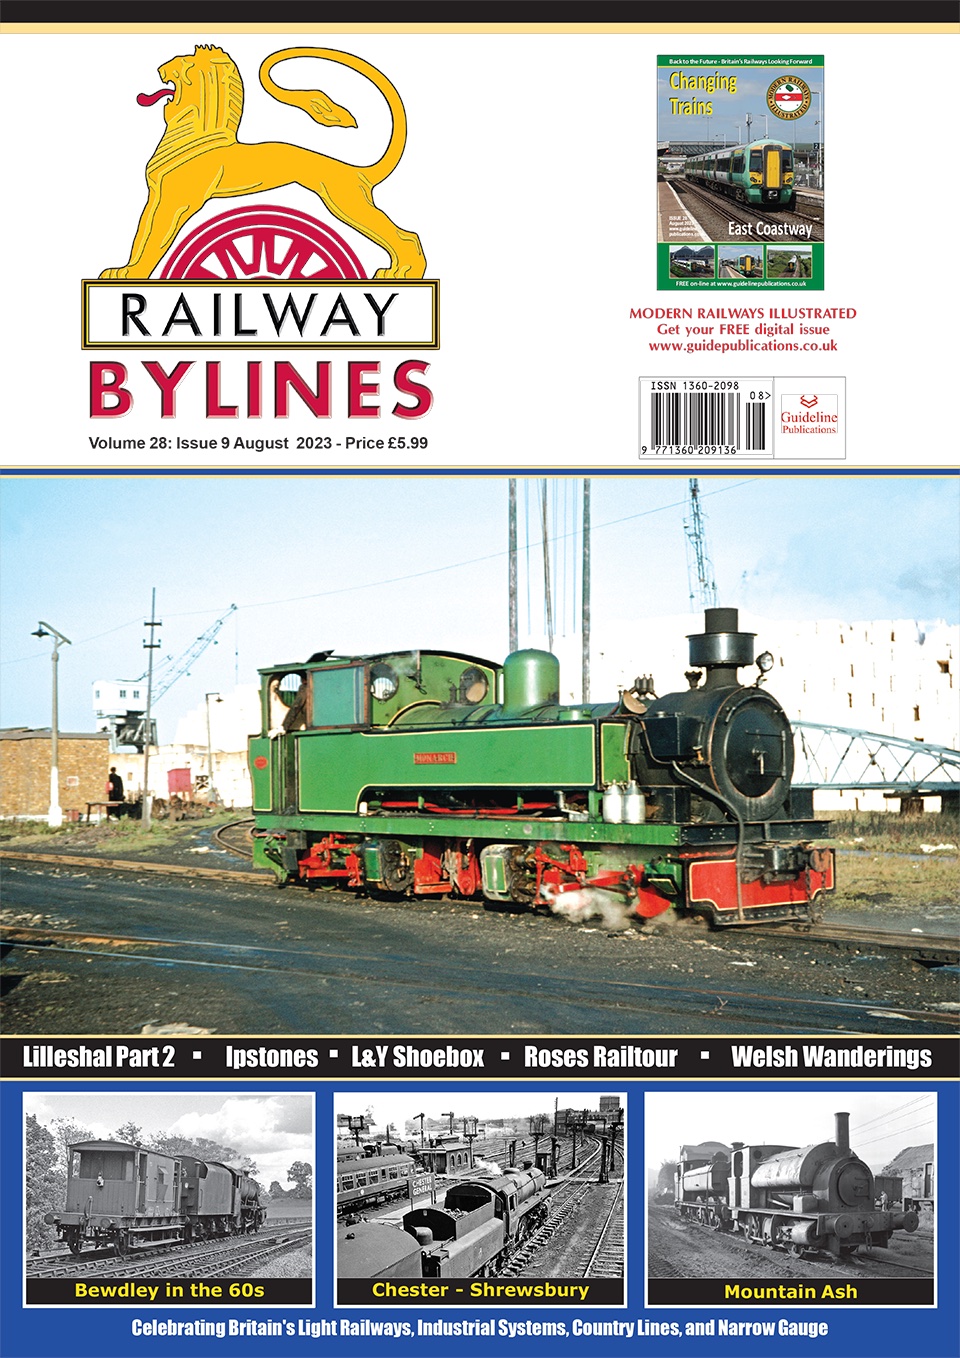 Guideline Publications Railway Bylines  vol 28 - issue 09 